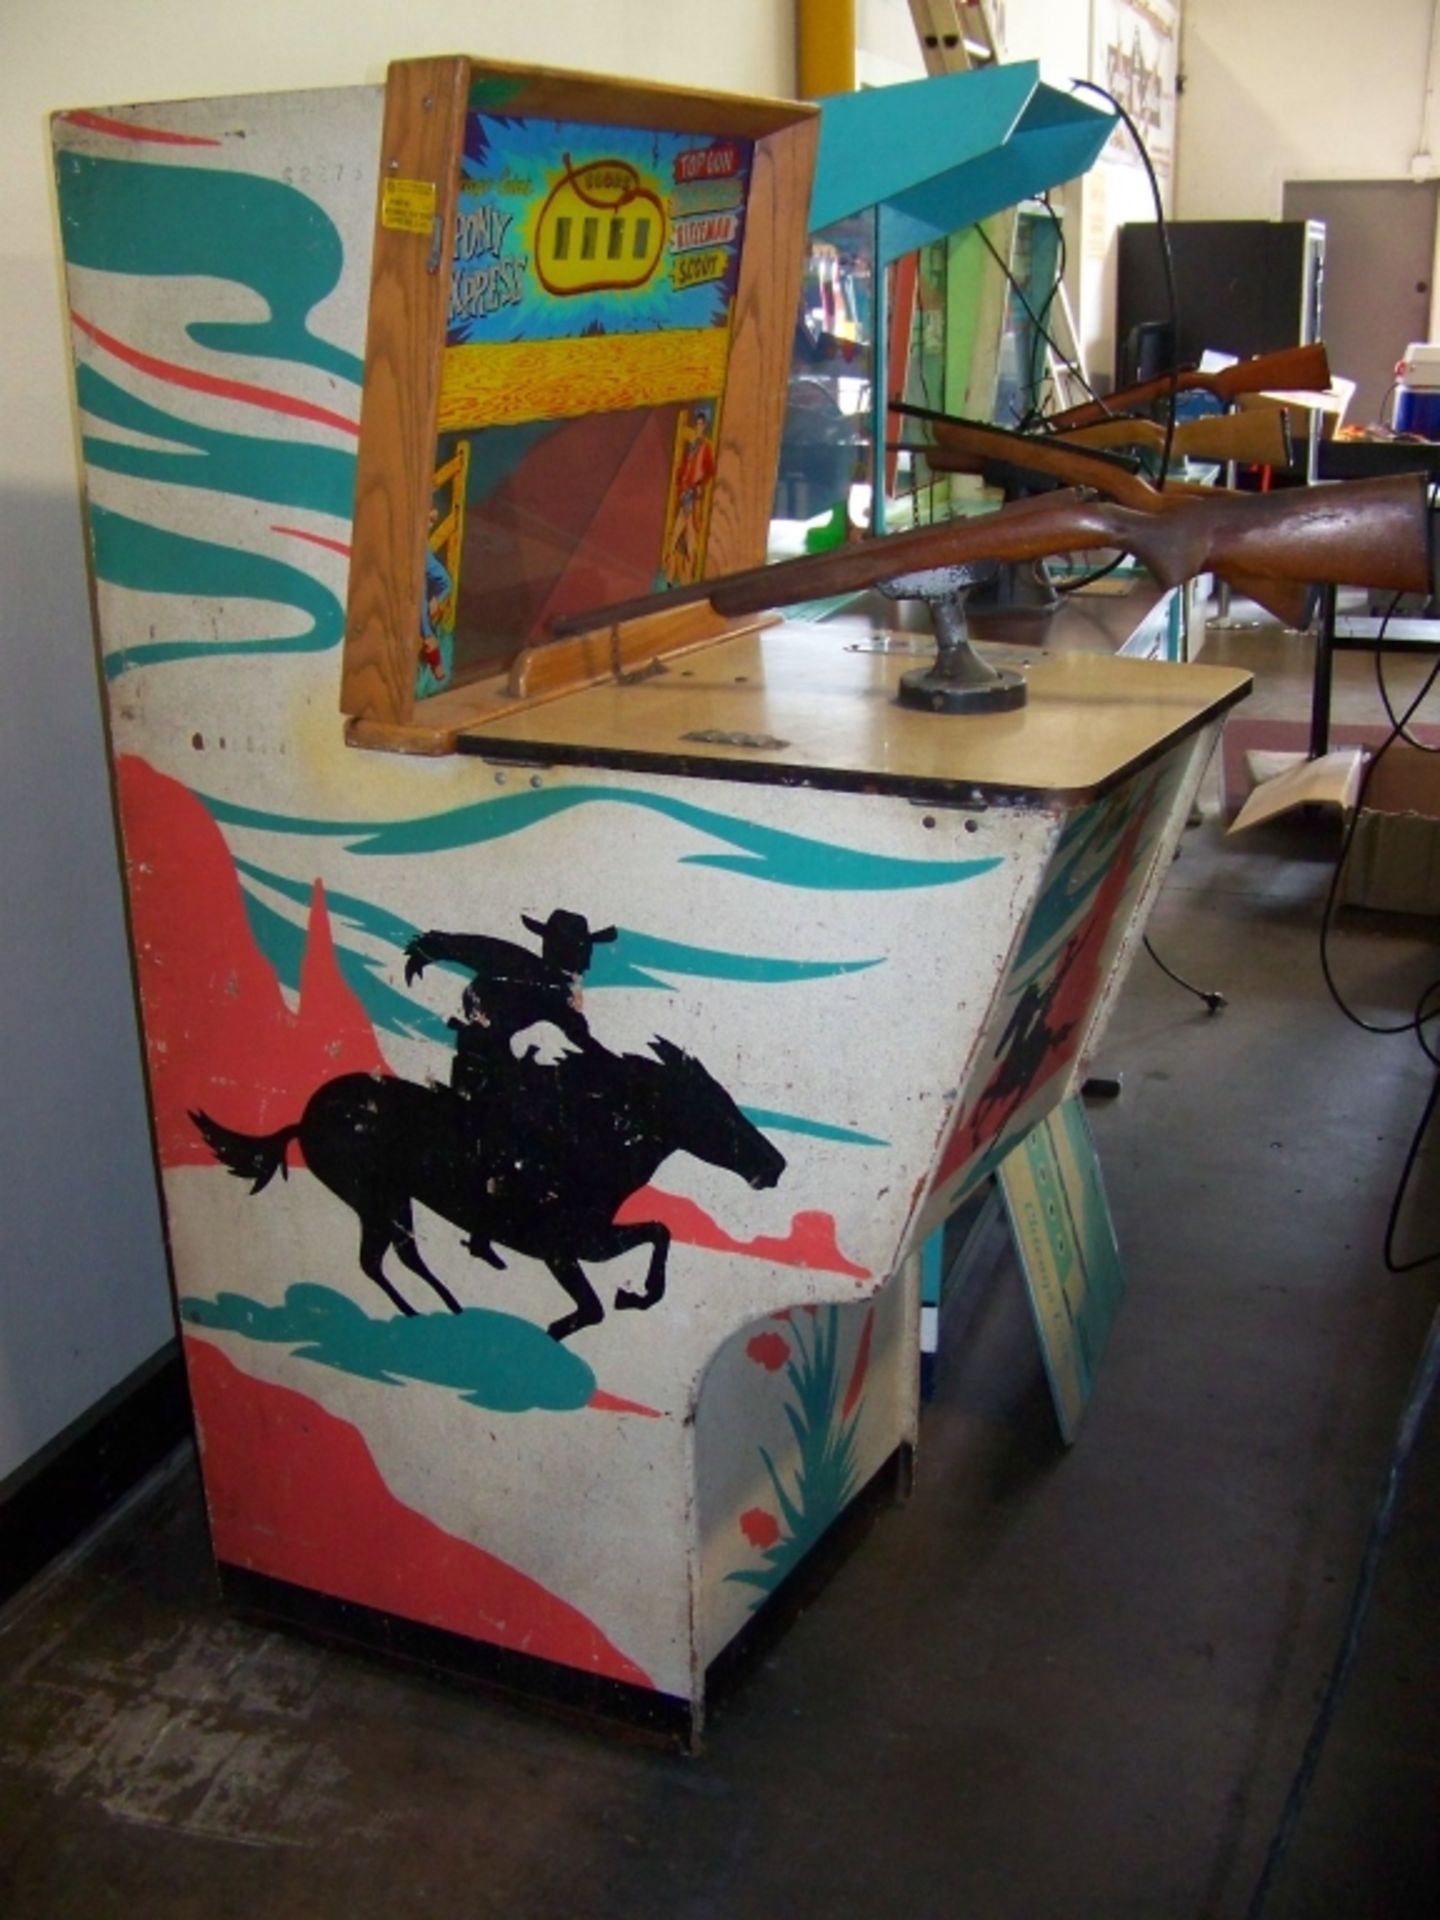 1960 CHICAGO COIN'S PONY EXPRESS RIFLE ARCADE GAME - Image 2 of 6